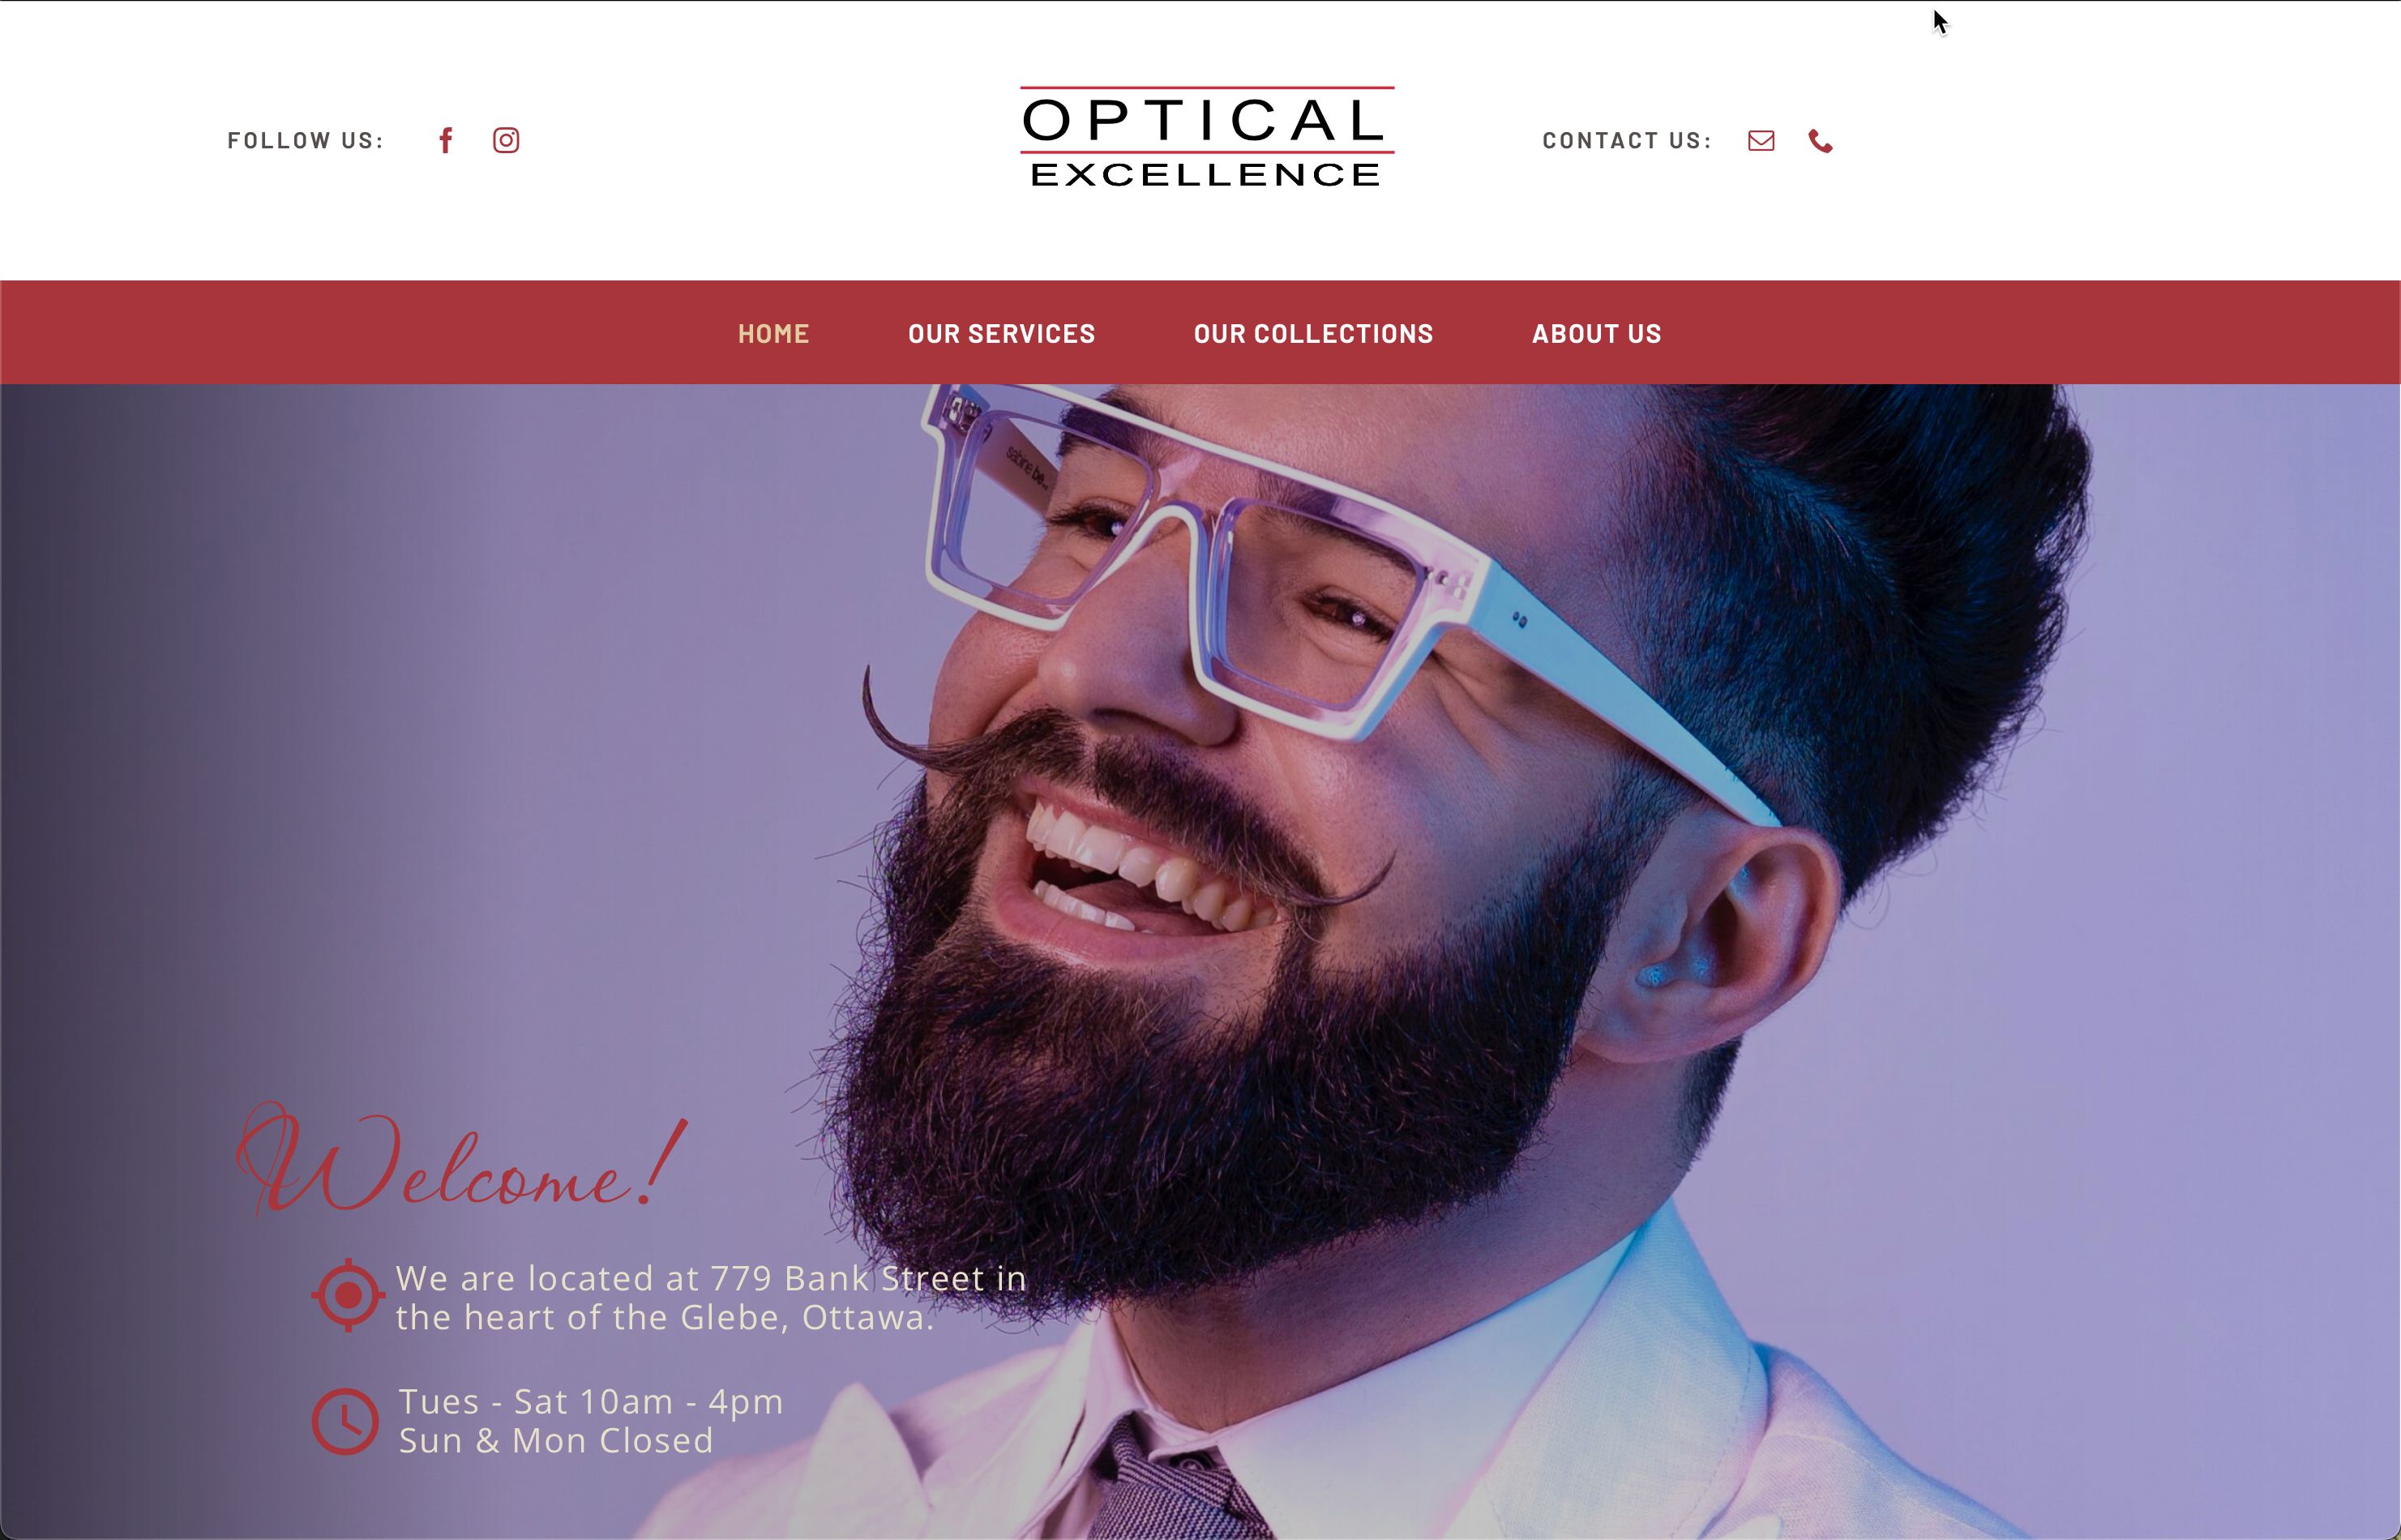 Optical Excellence website frontpage